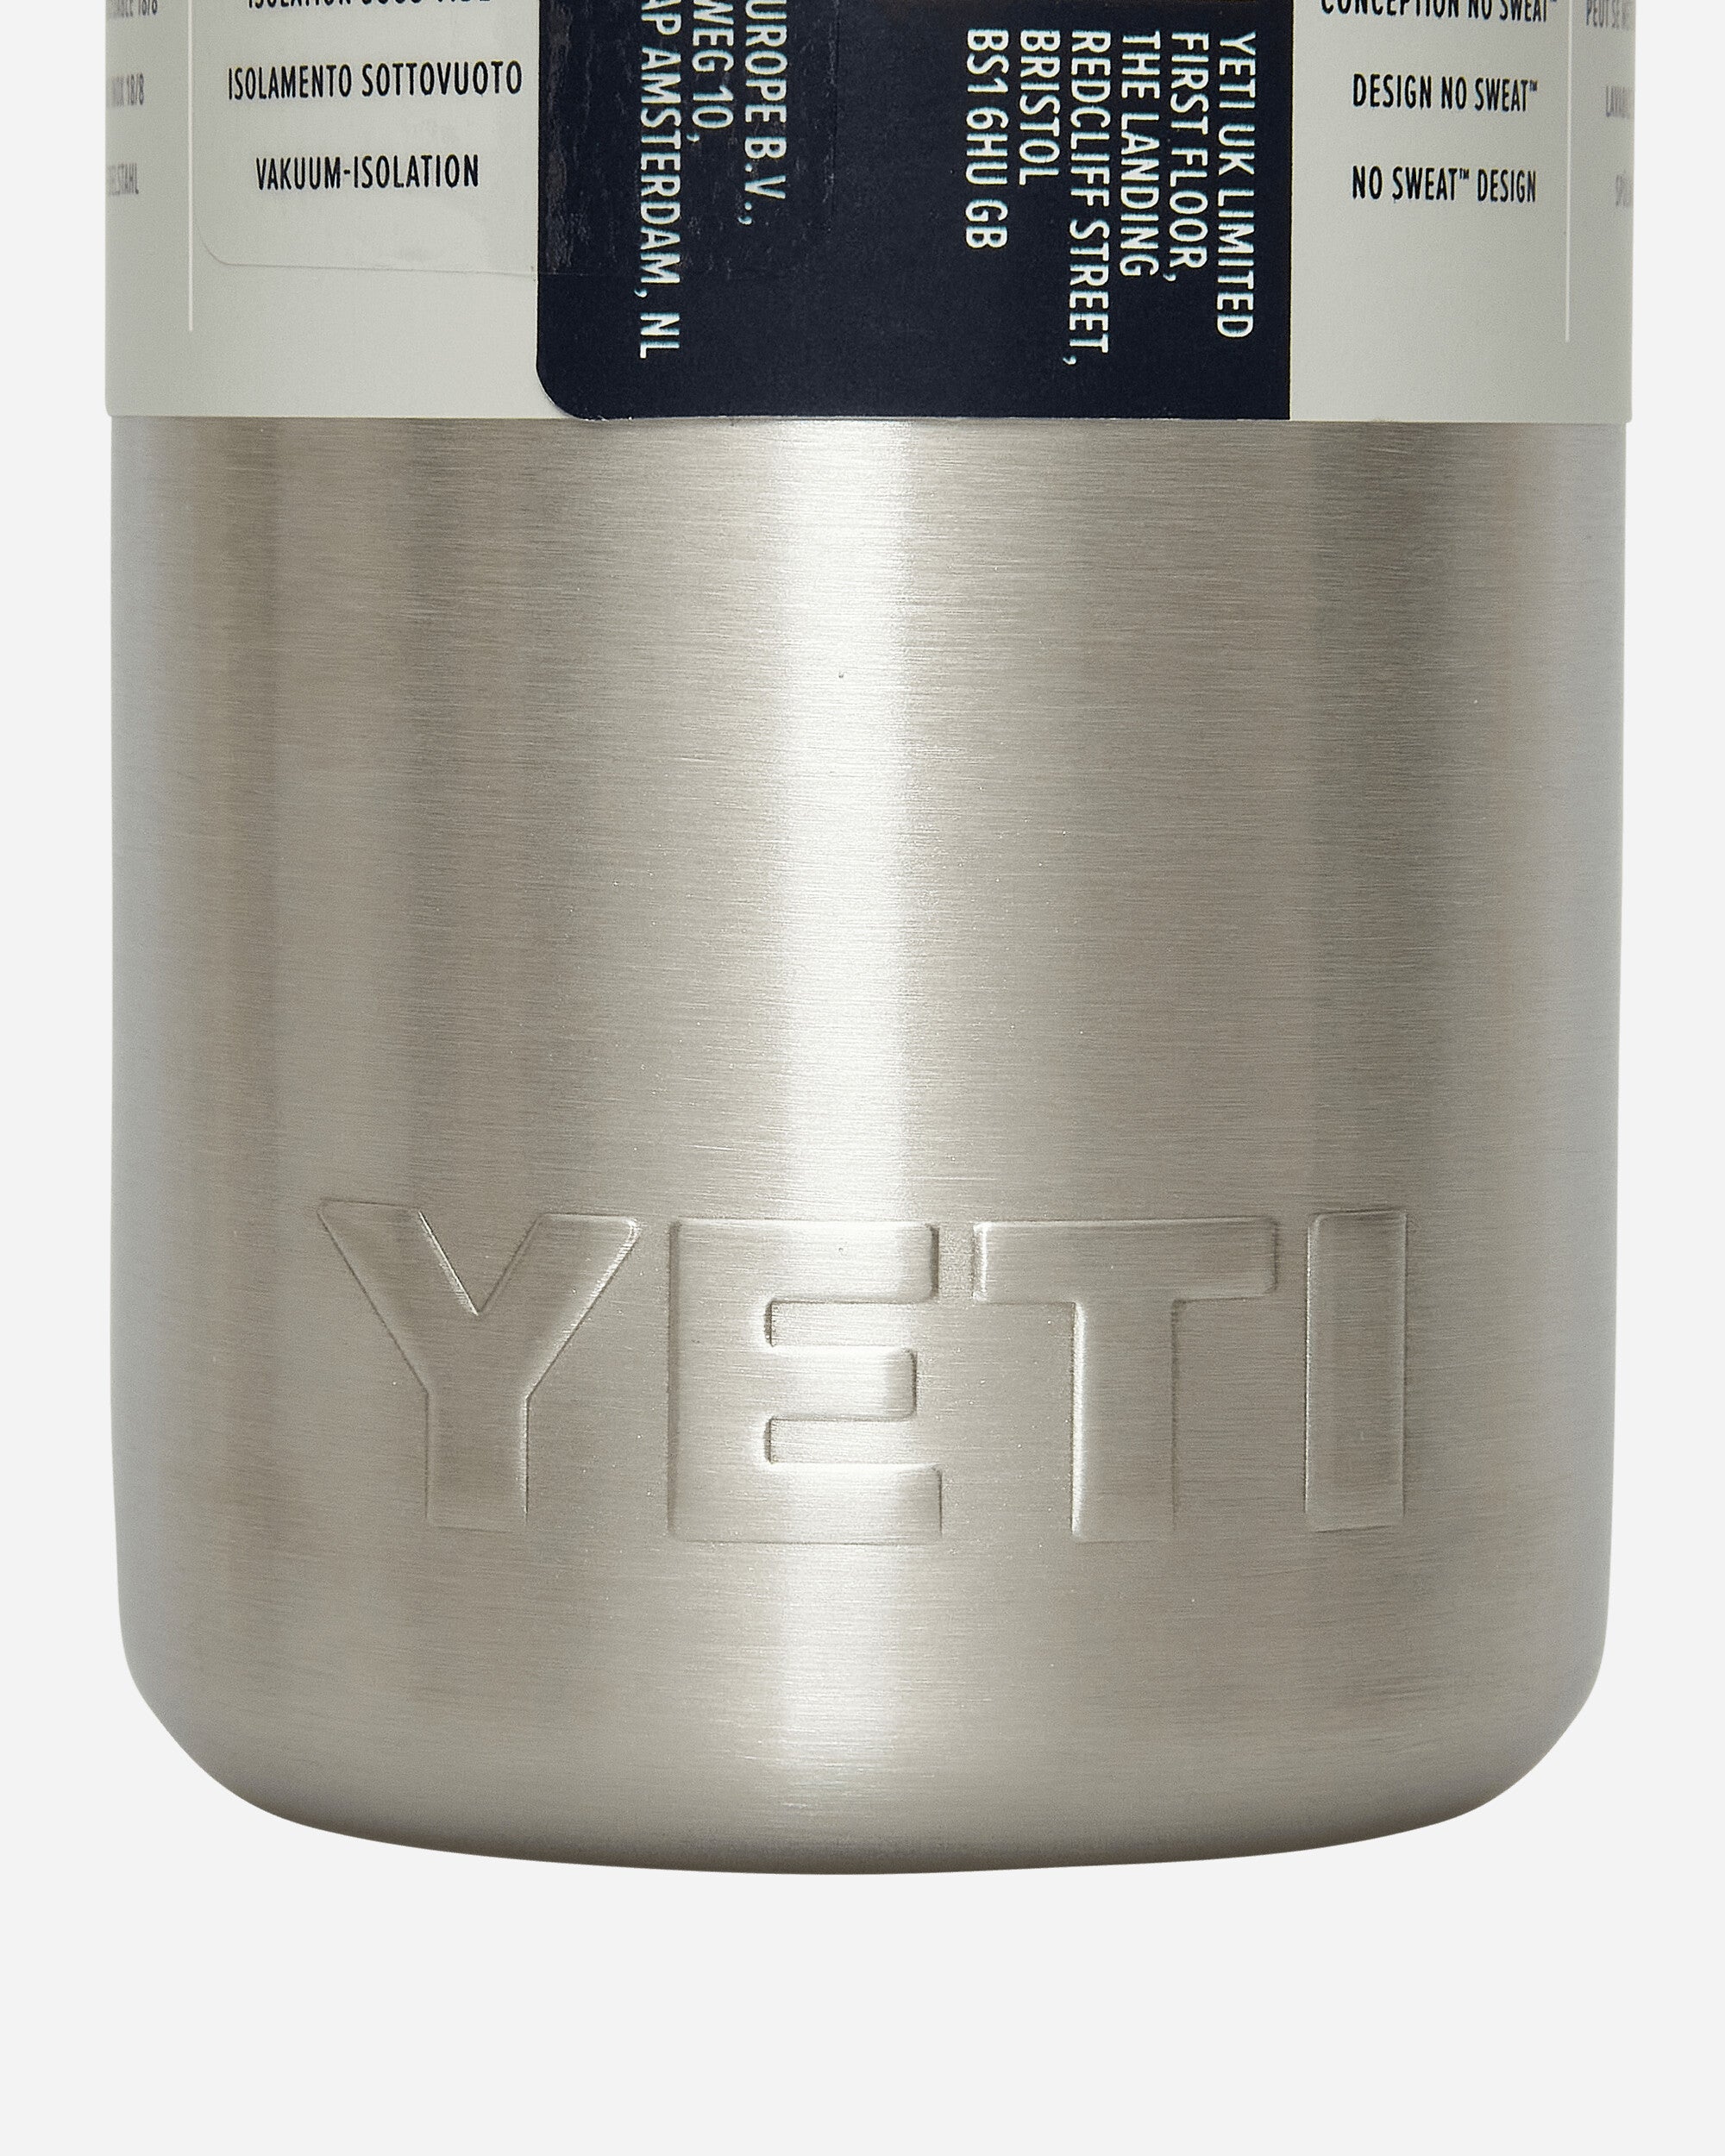 Yeti Rambler Colster Slim STAINLESS STEEL Equipment Bottles and Bowls 0810 STS